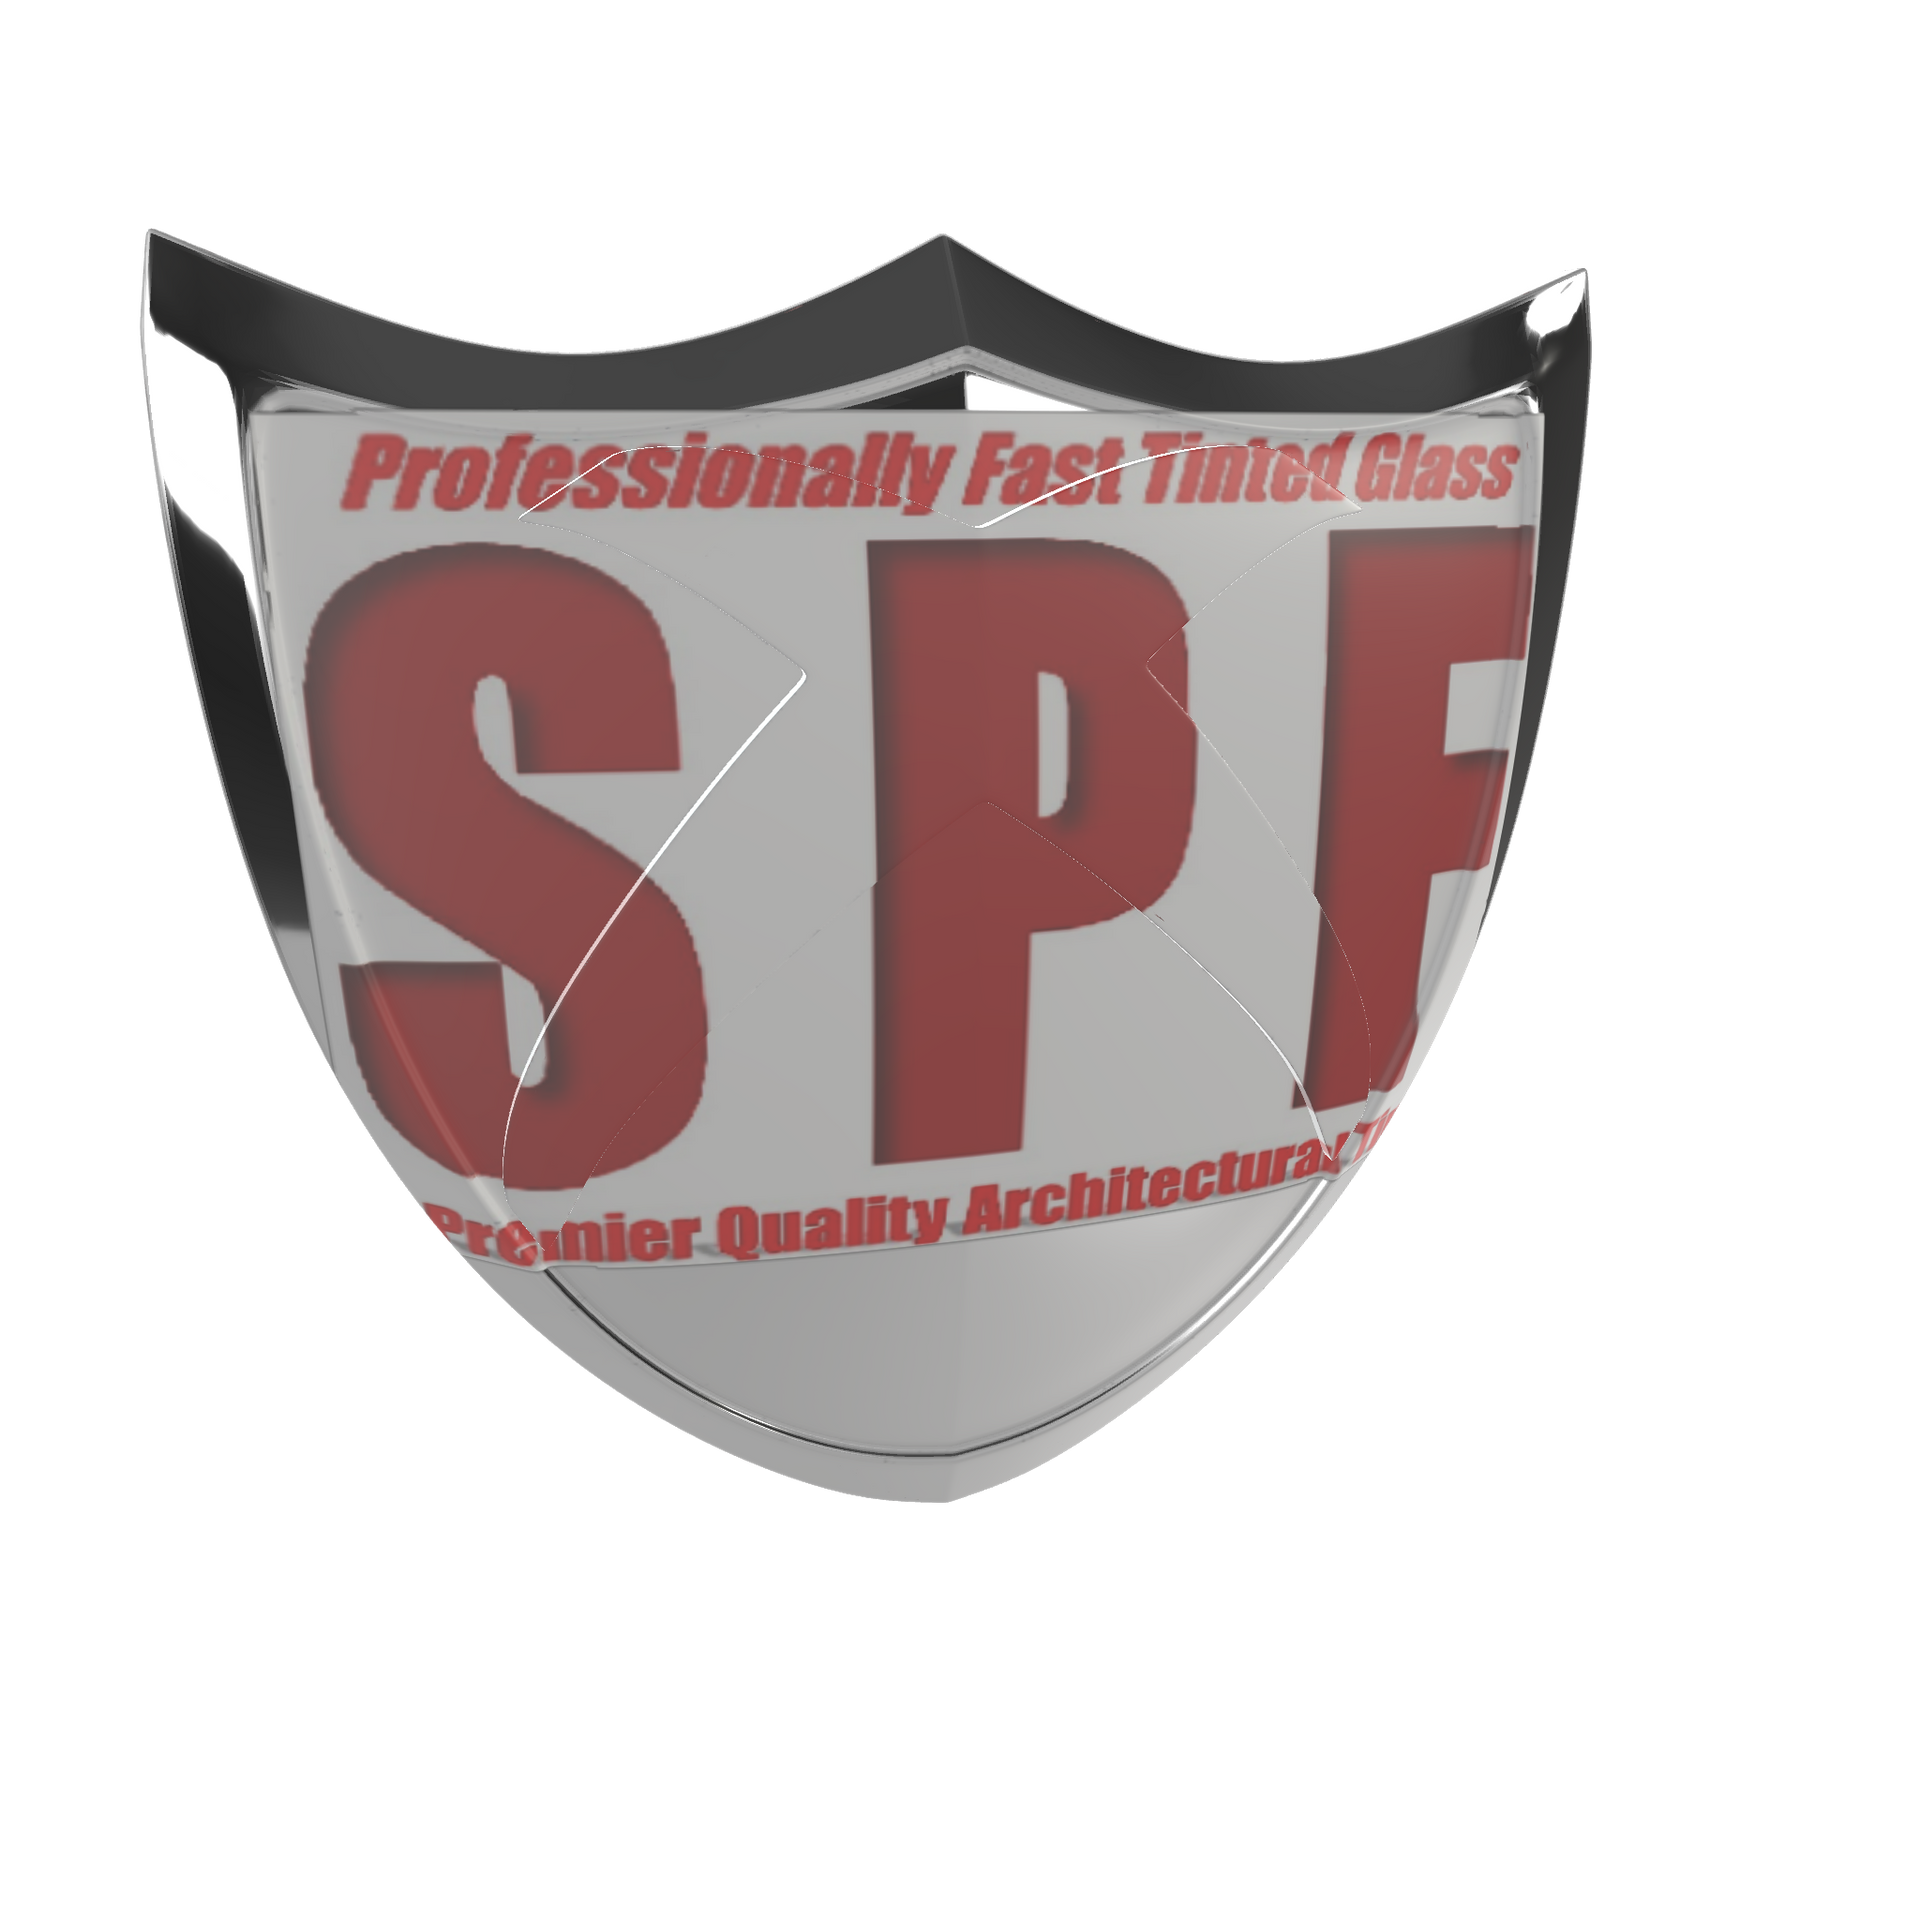 SPF Premier Quality Architectural Tint & Installation Services (logo) seal